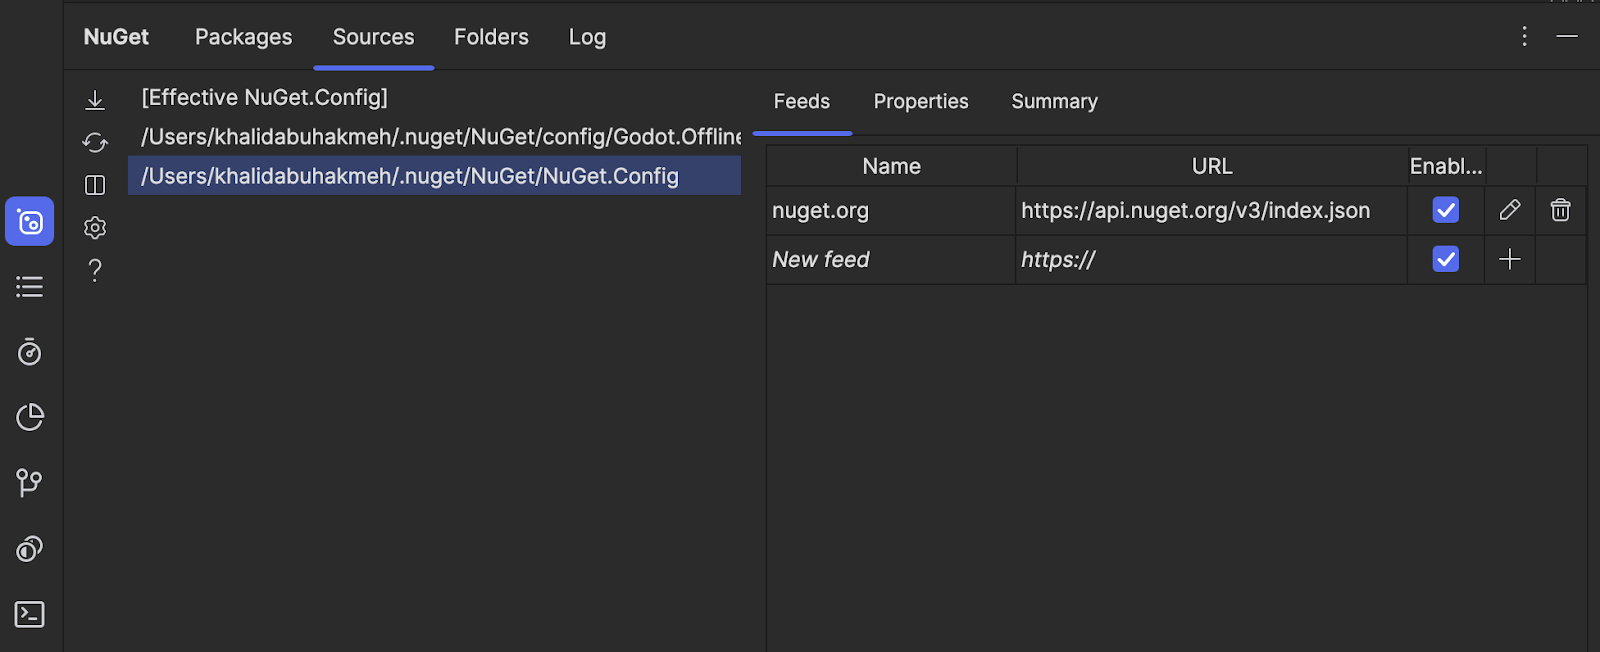 Sources tab in NuGet Tool Window showing the paths to config files.